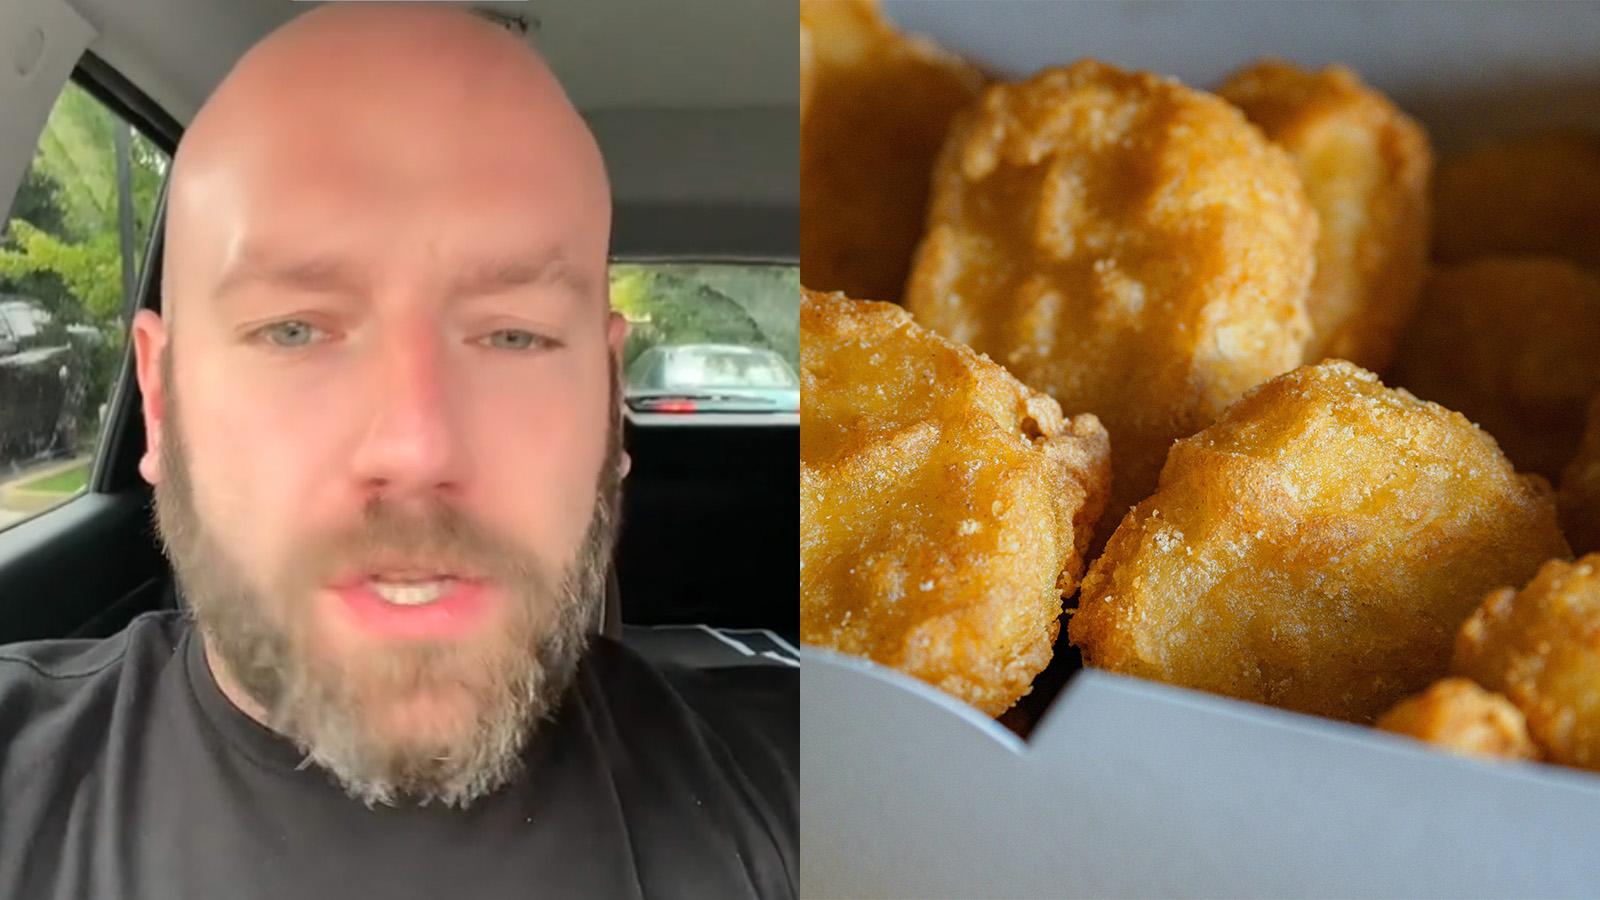 Former McDonalds Chef Mike Haracz on right, chicken nuggets on left